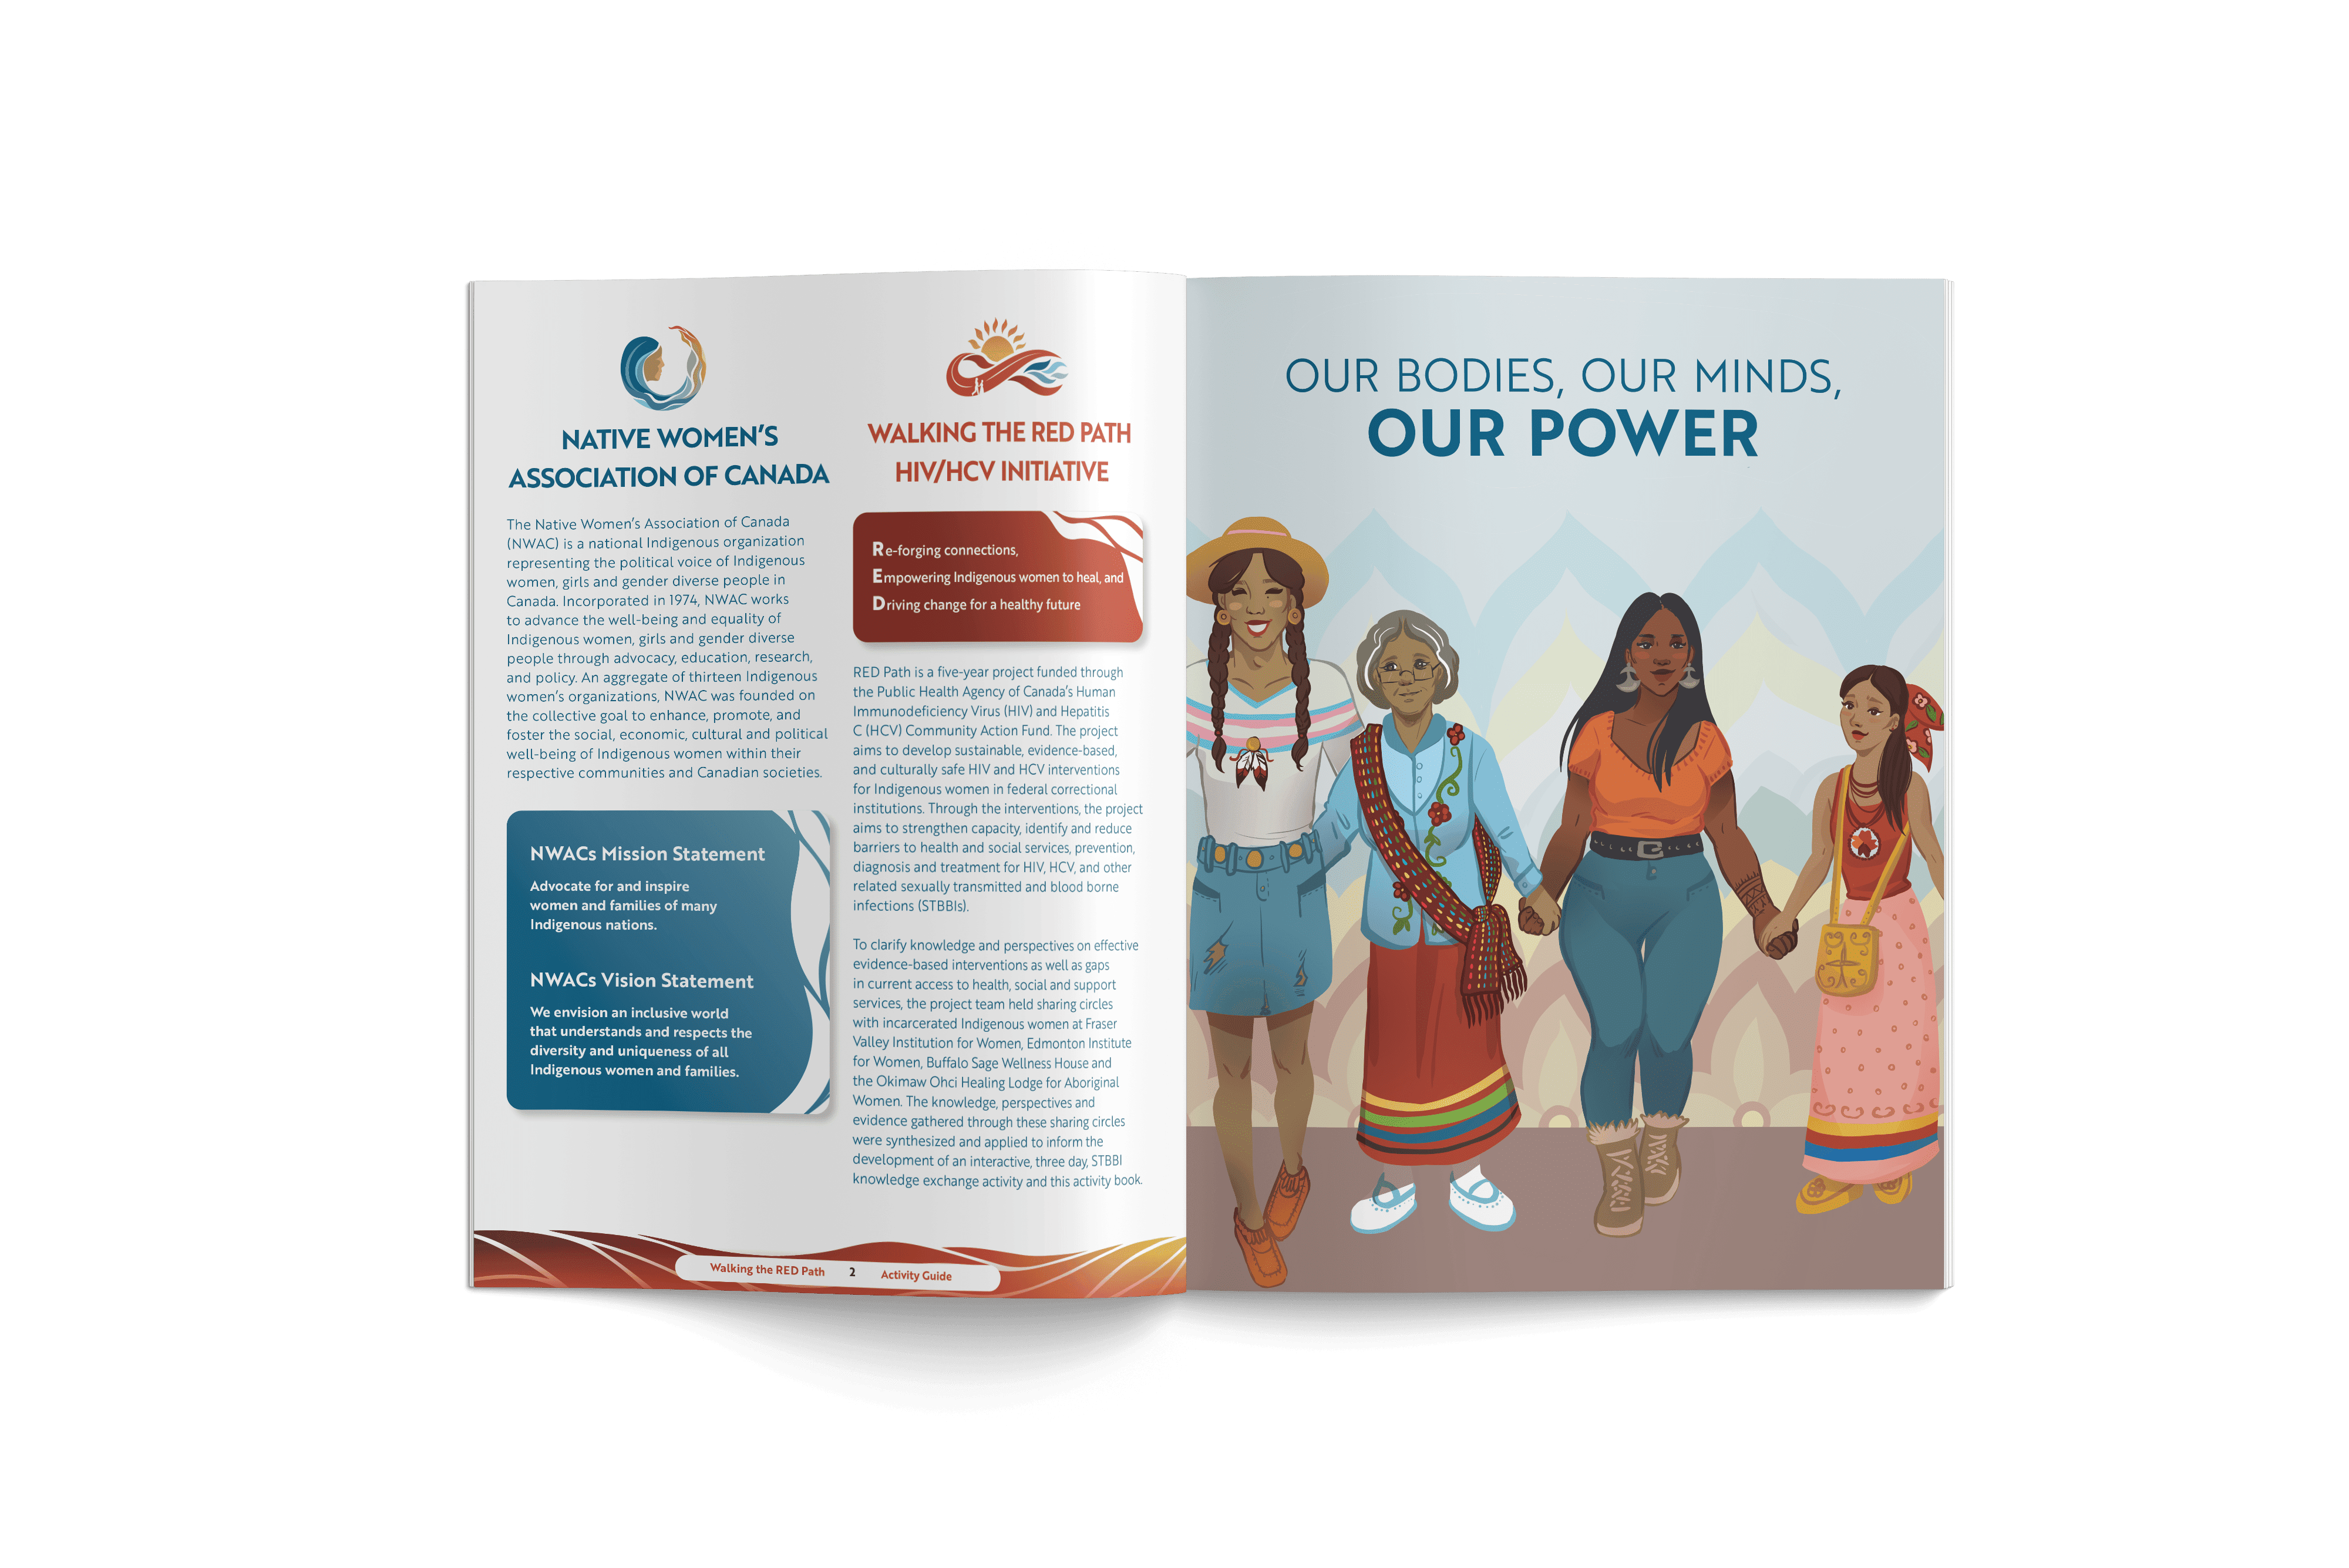 An internal spread of the NWAC Walking the Red Path HIV/HCV Initiative. The spread features information about NWAC and the initiative on the left spread, and an illustration of several women holding hands on the right spread with a title that reads 'Our bodies, our minds, our power.'